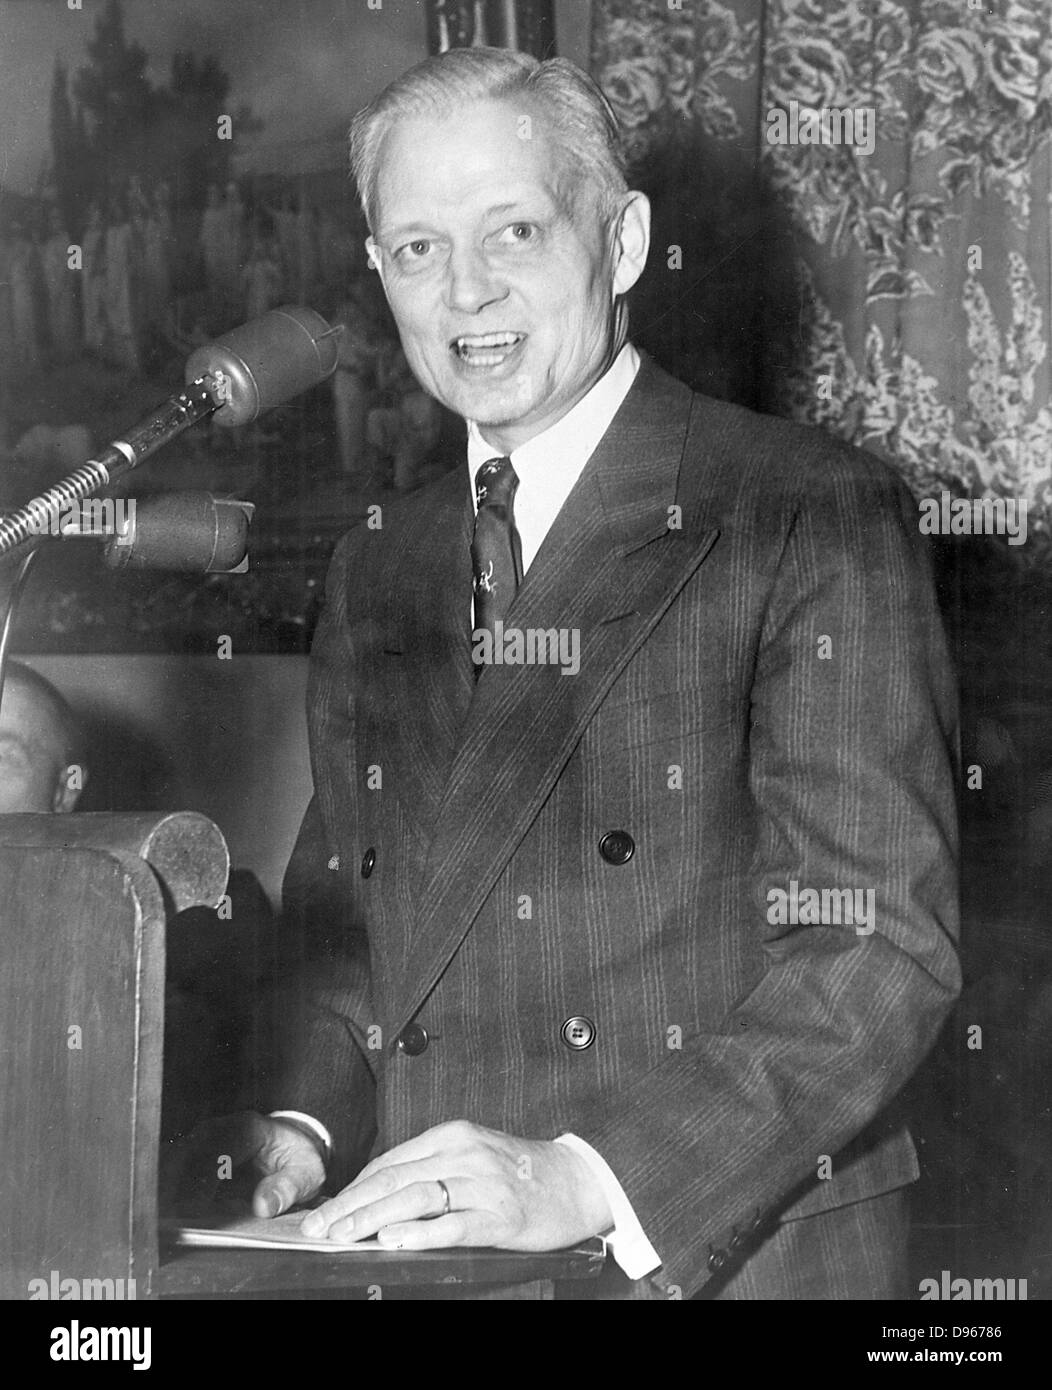 Sherman Adams (1899-1986) delivering a speech.  American politician. Elected to Congress in 1945; elected Governor of New Hampshire 1949. Assistant to President Eisenhower. Stock Photo